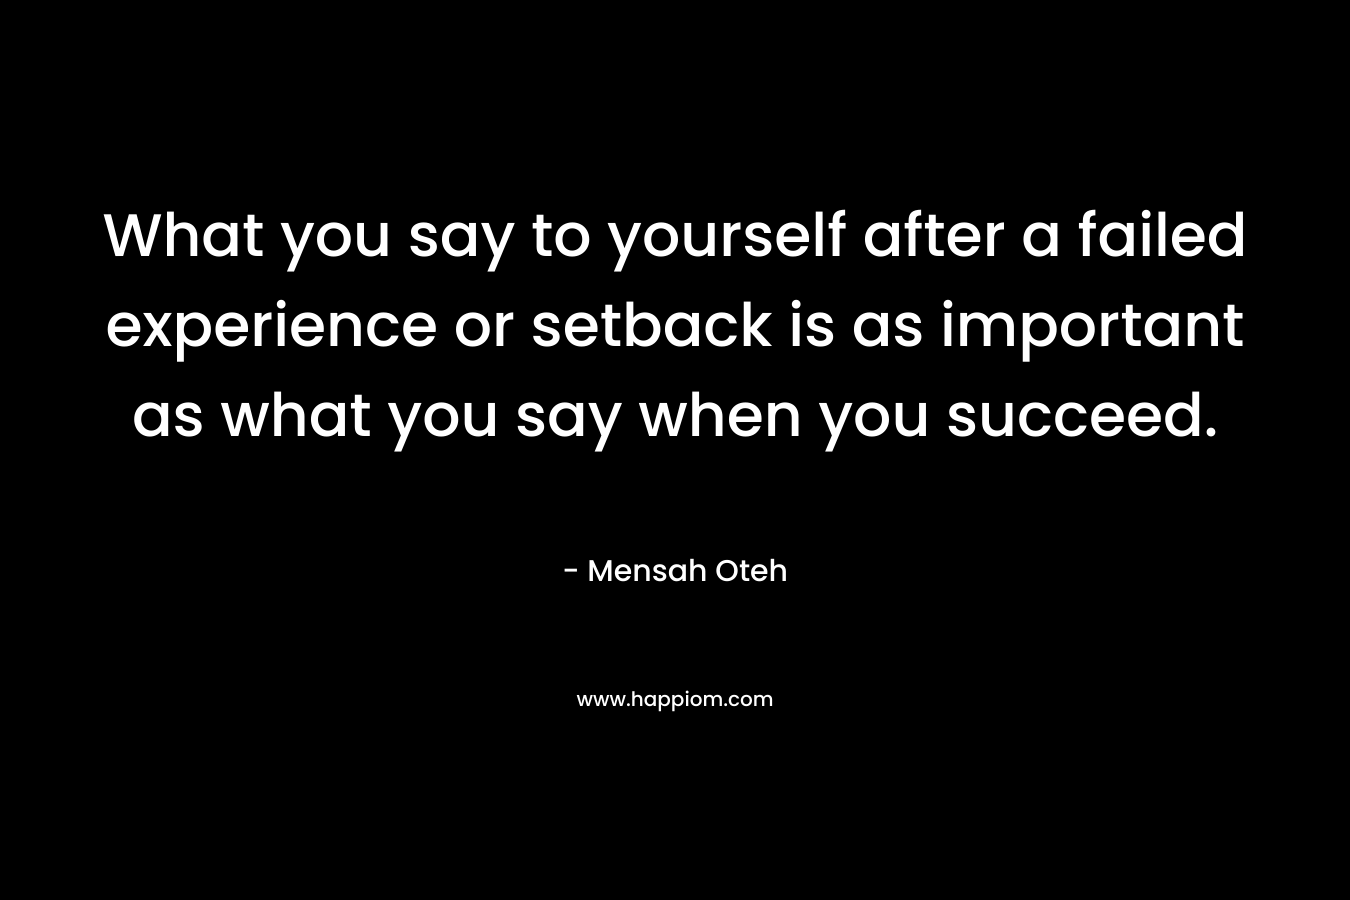 What you say to yourself after a failed experience or setback is as important as what you say when you succeed.